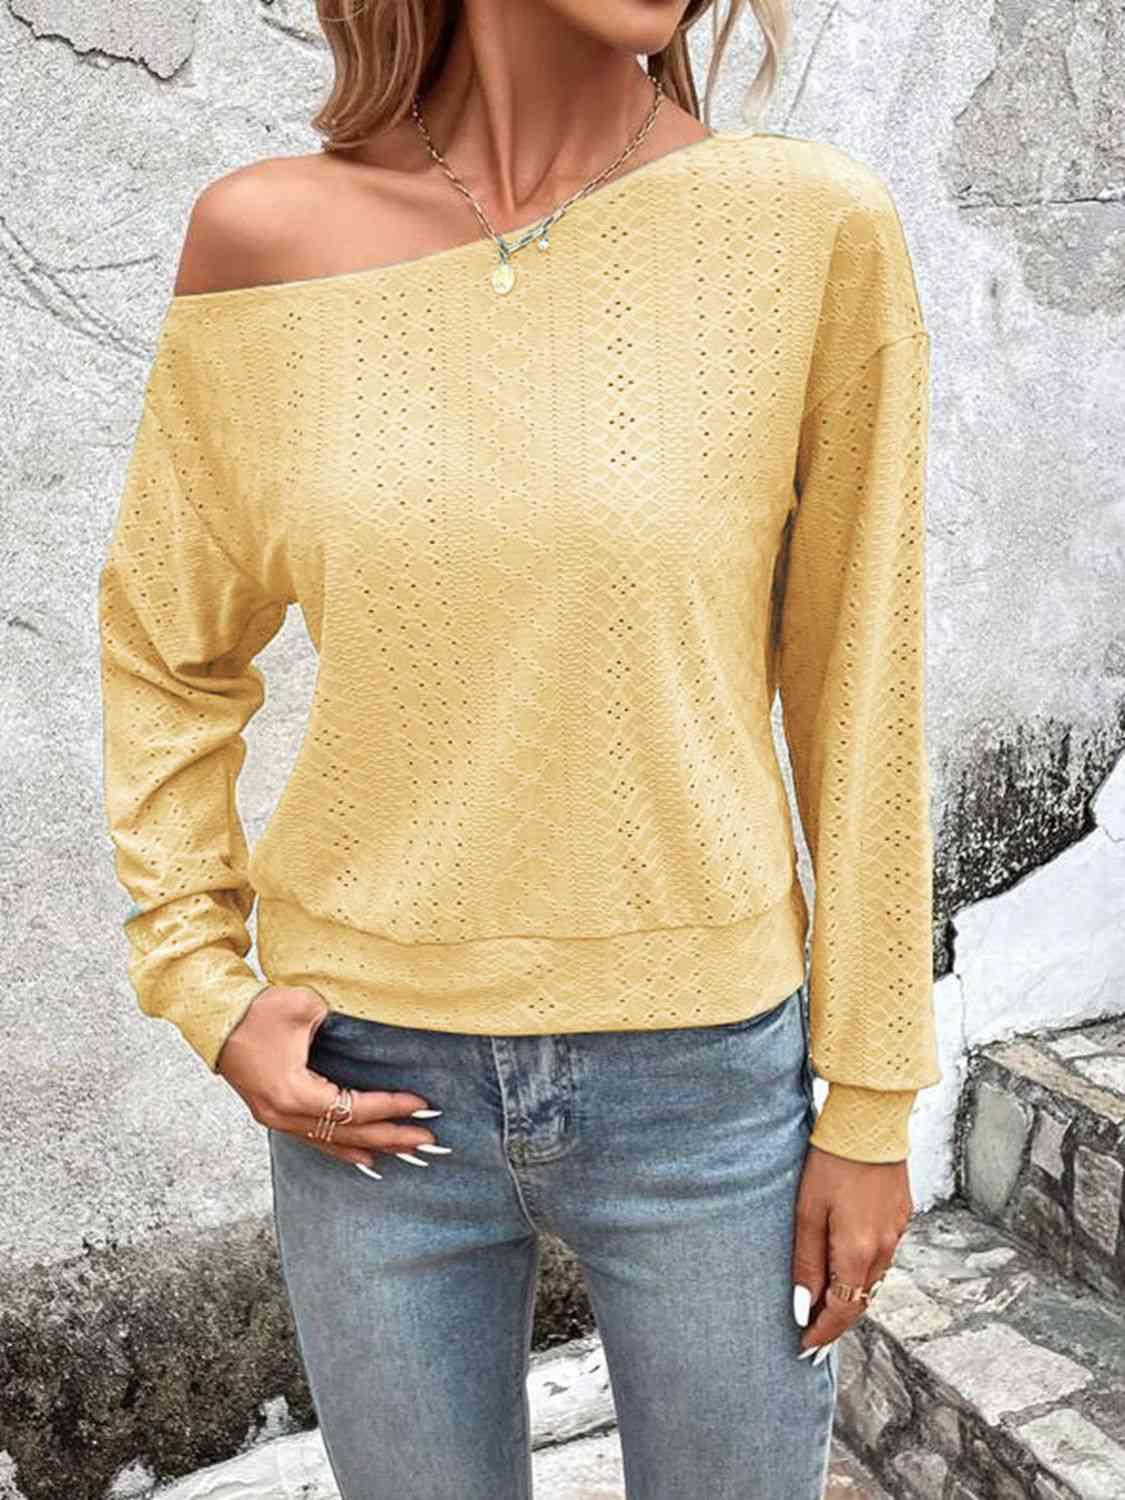 a woman wearing a yellow sweater and jeans